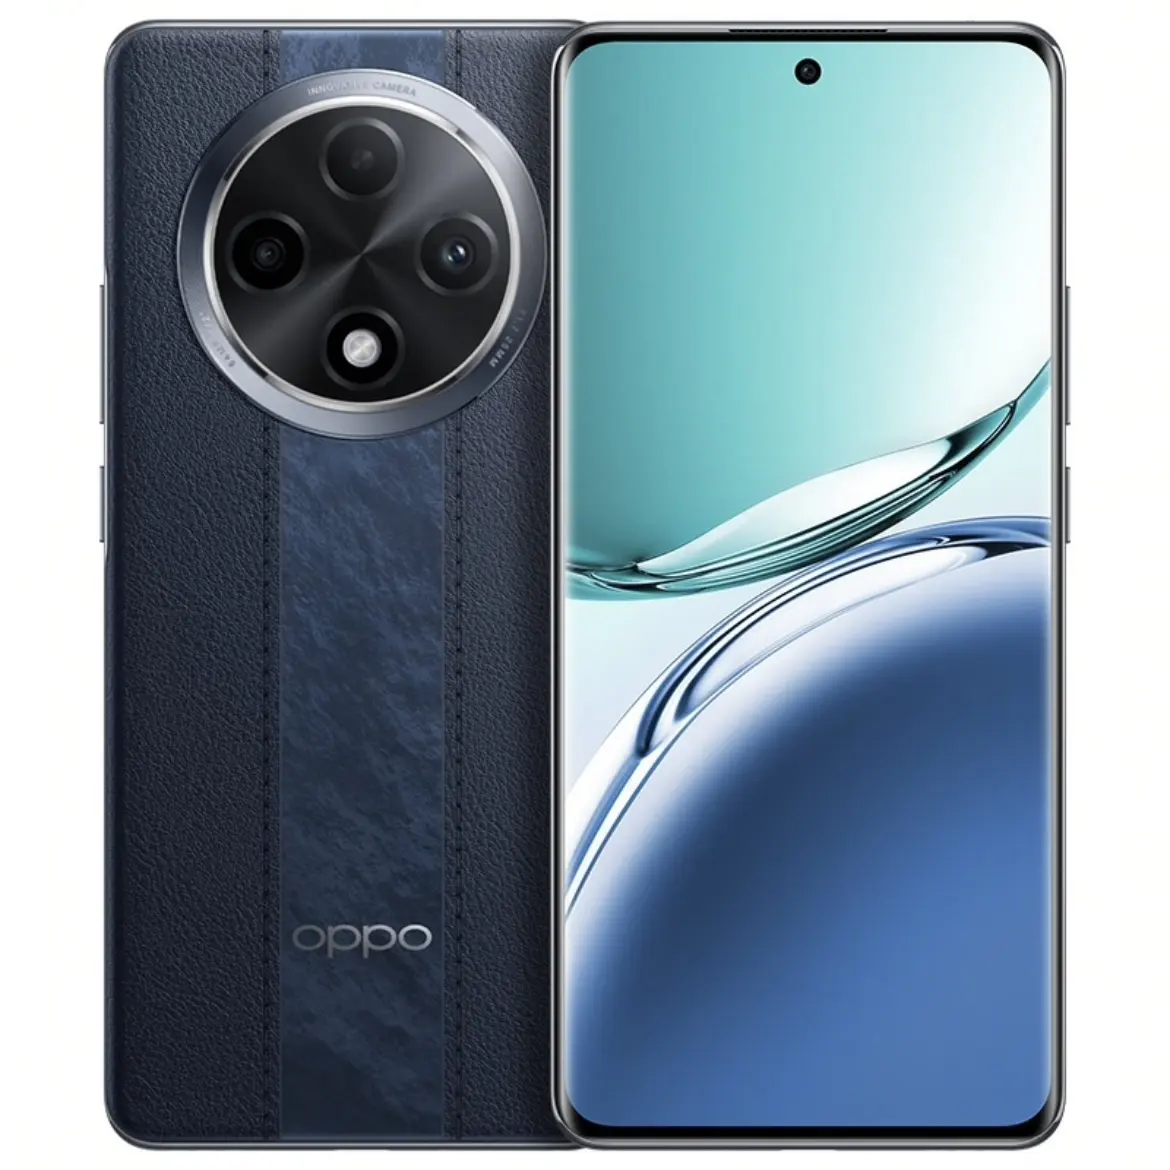 OPPO A3 Pro 5G full level waterproof 360 Drop resistant four years durable large battery AI mobile phone student phone